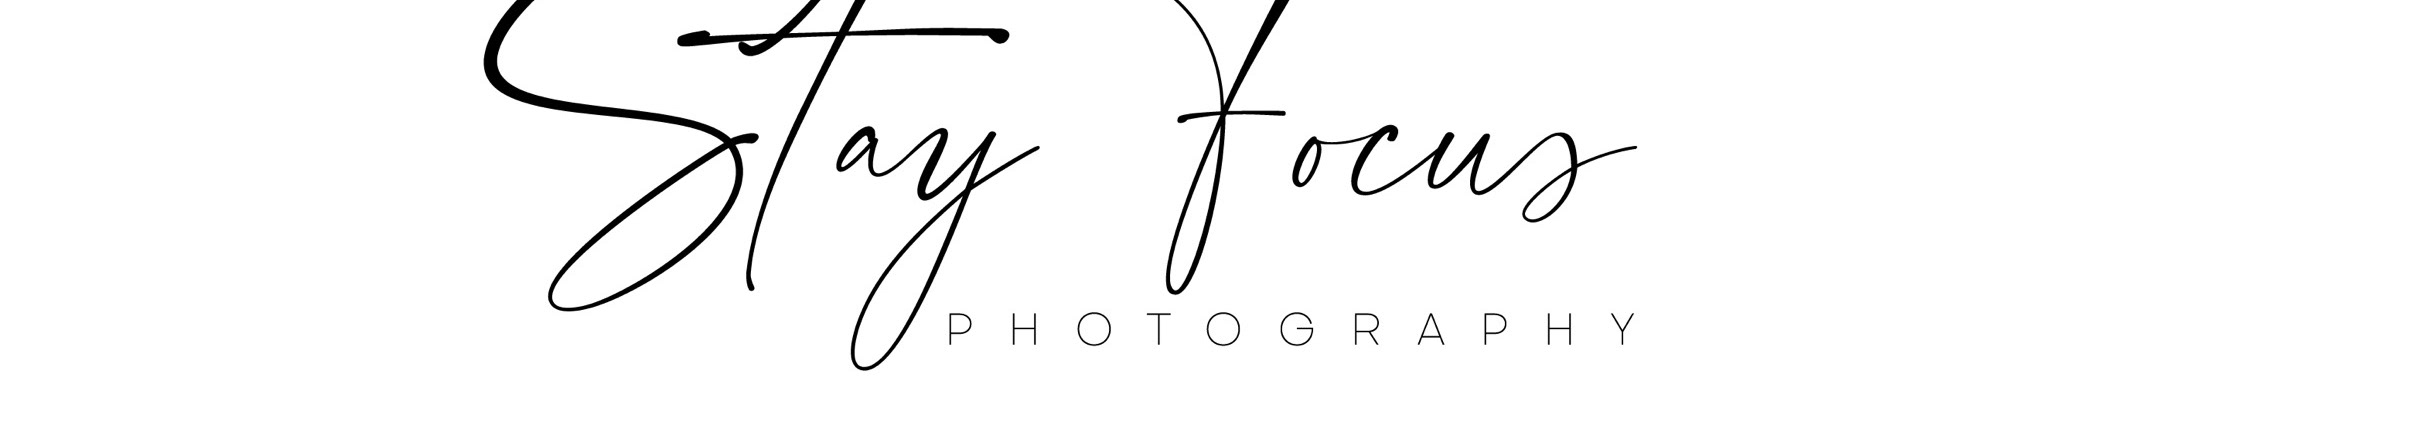 STAYFOCUS PHOTOGRAPHY's profile banner